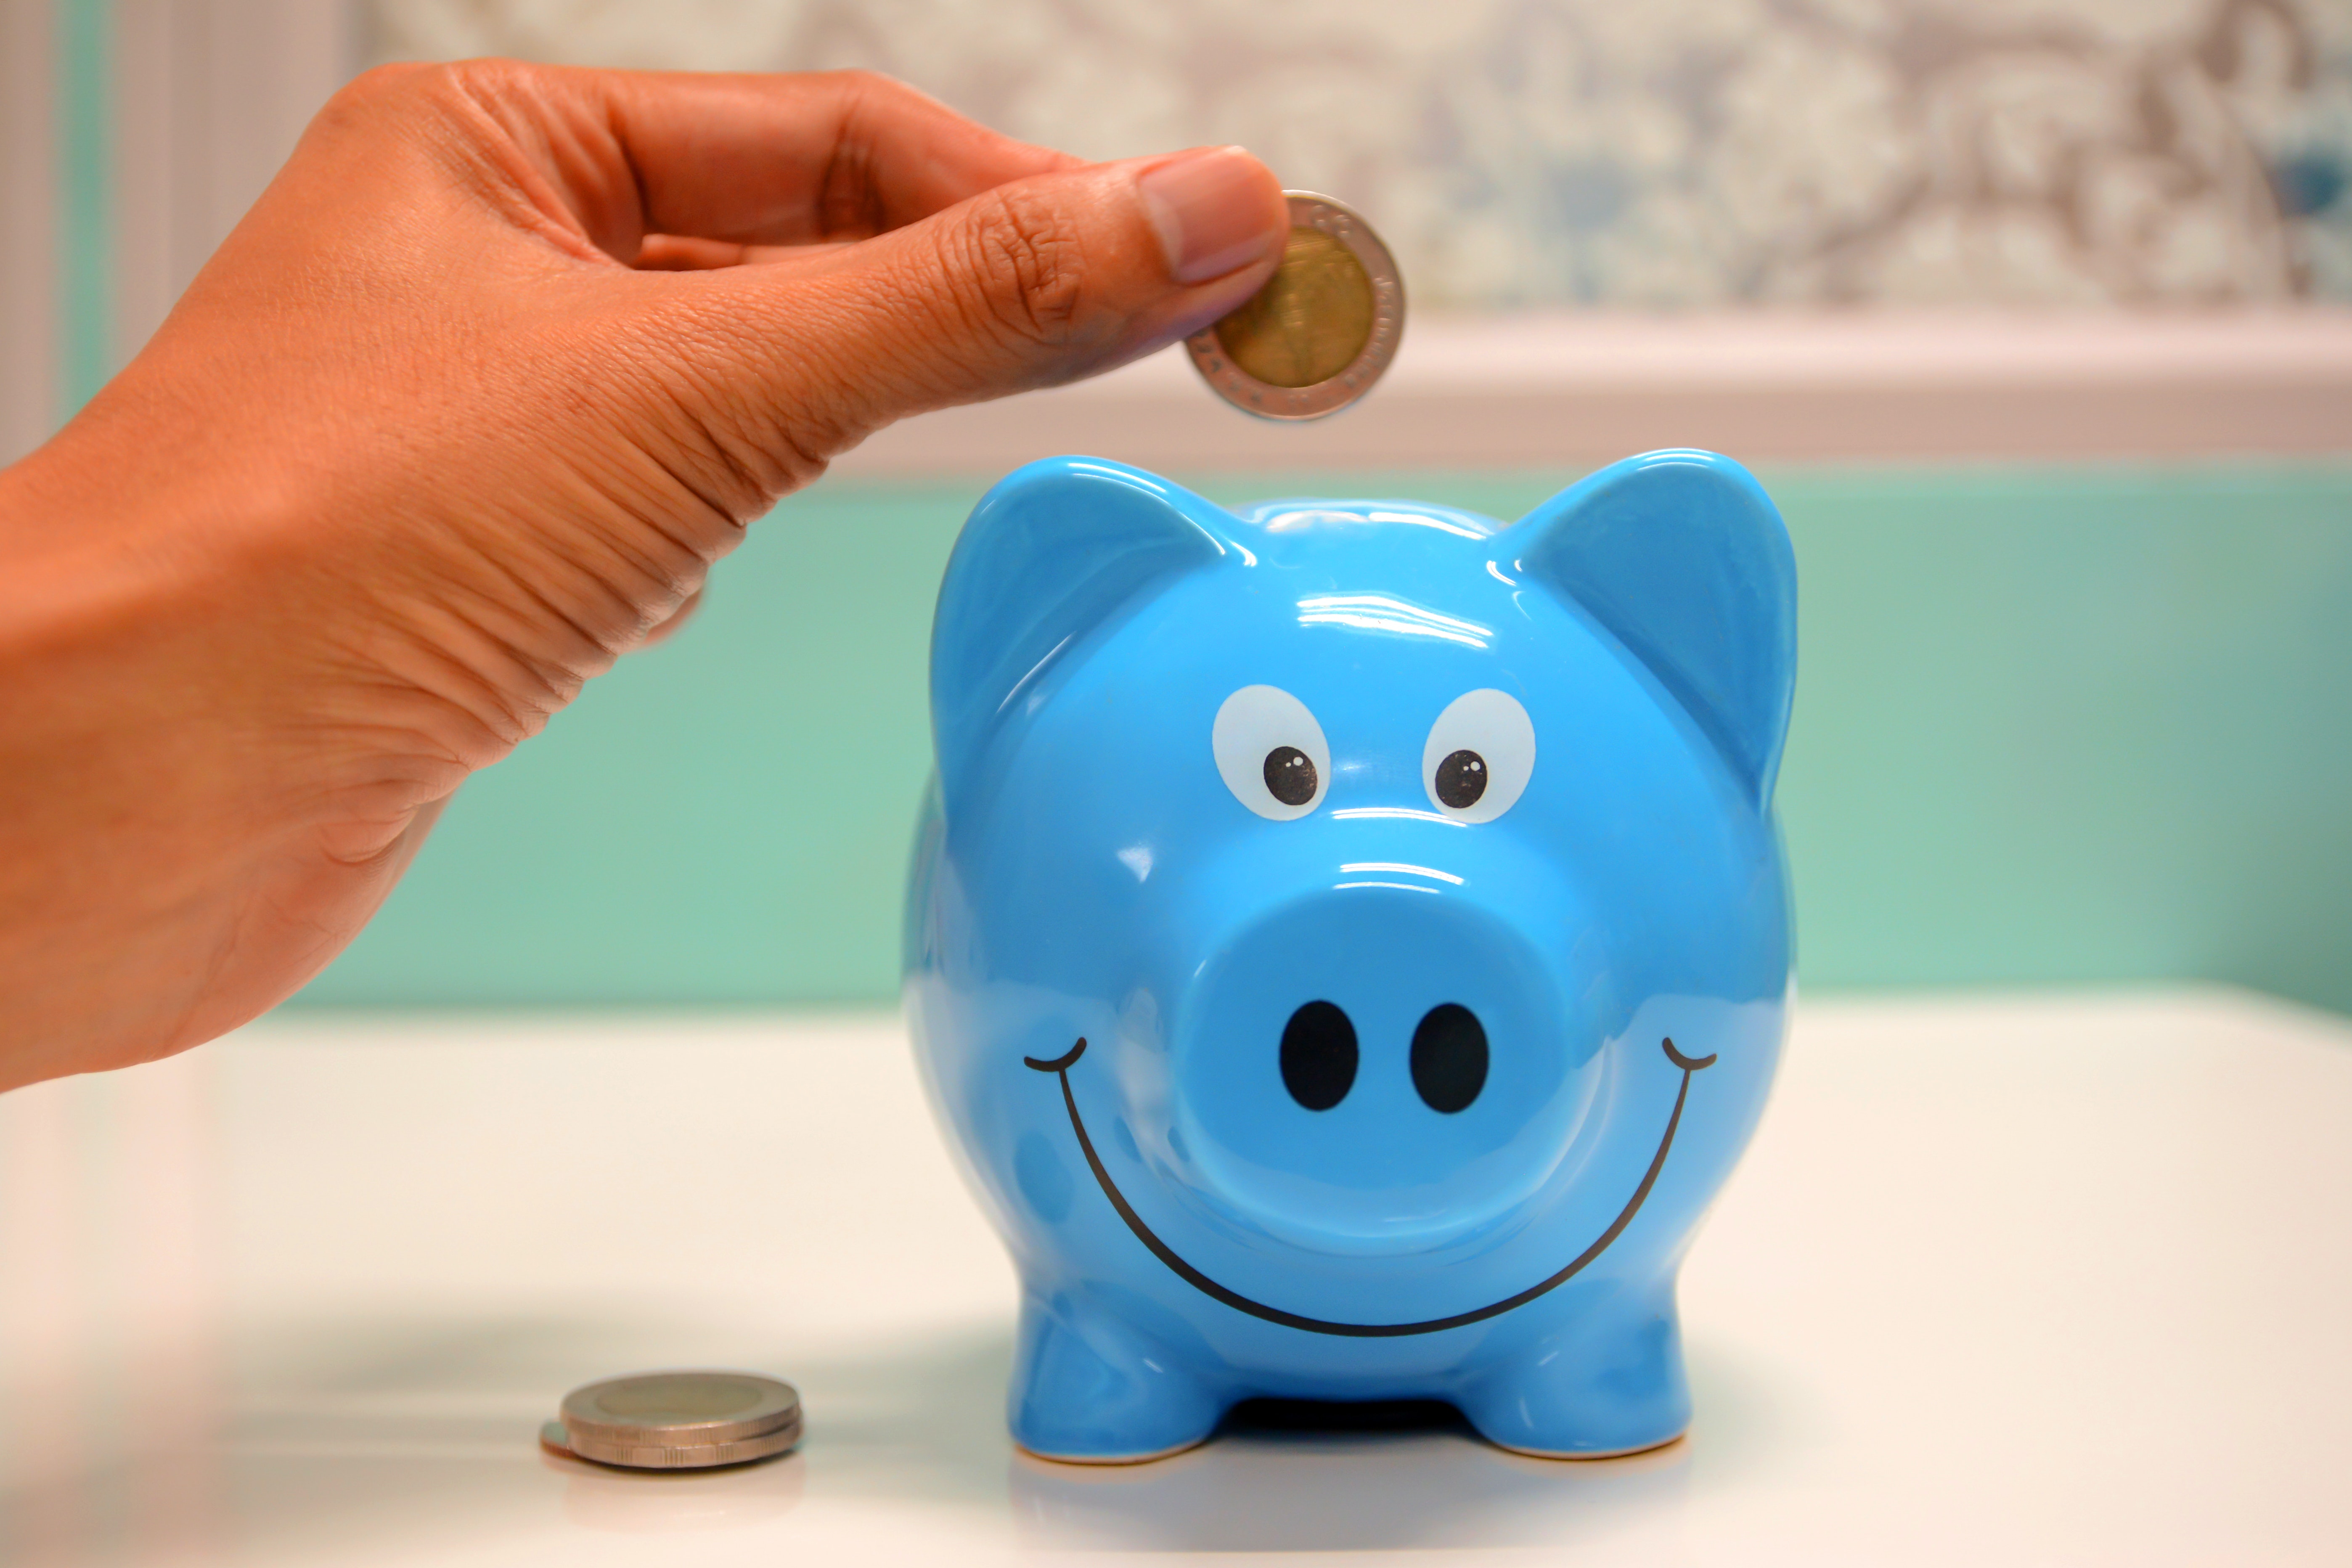 Putting money in a piggy bank to save up for Invisalign